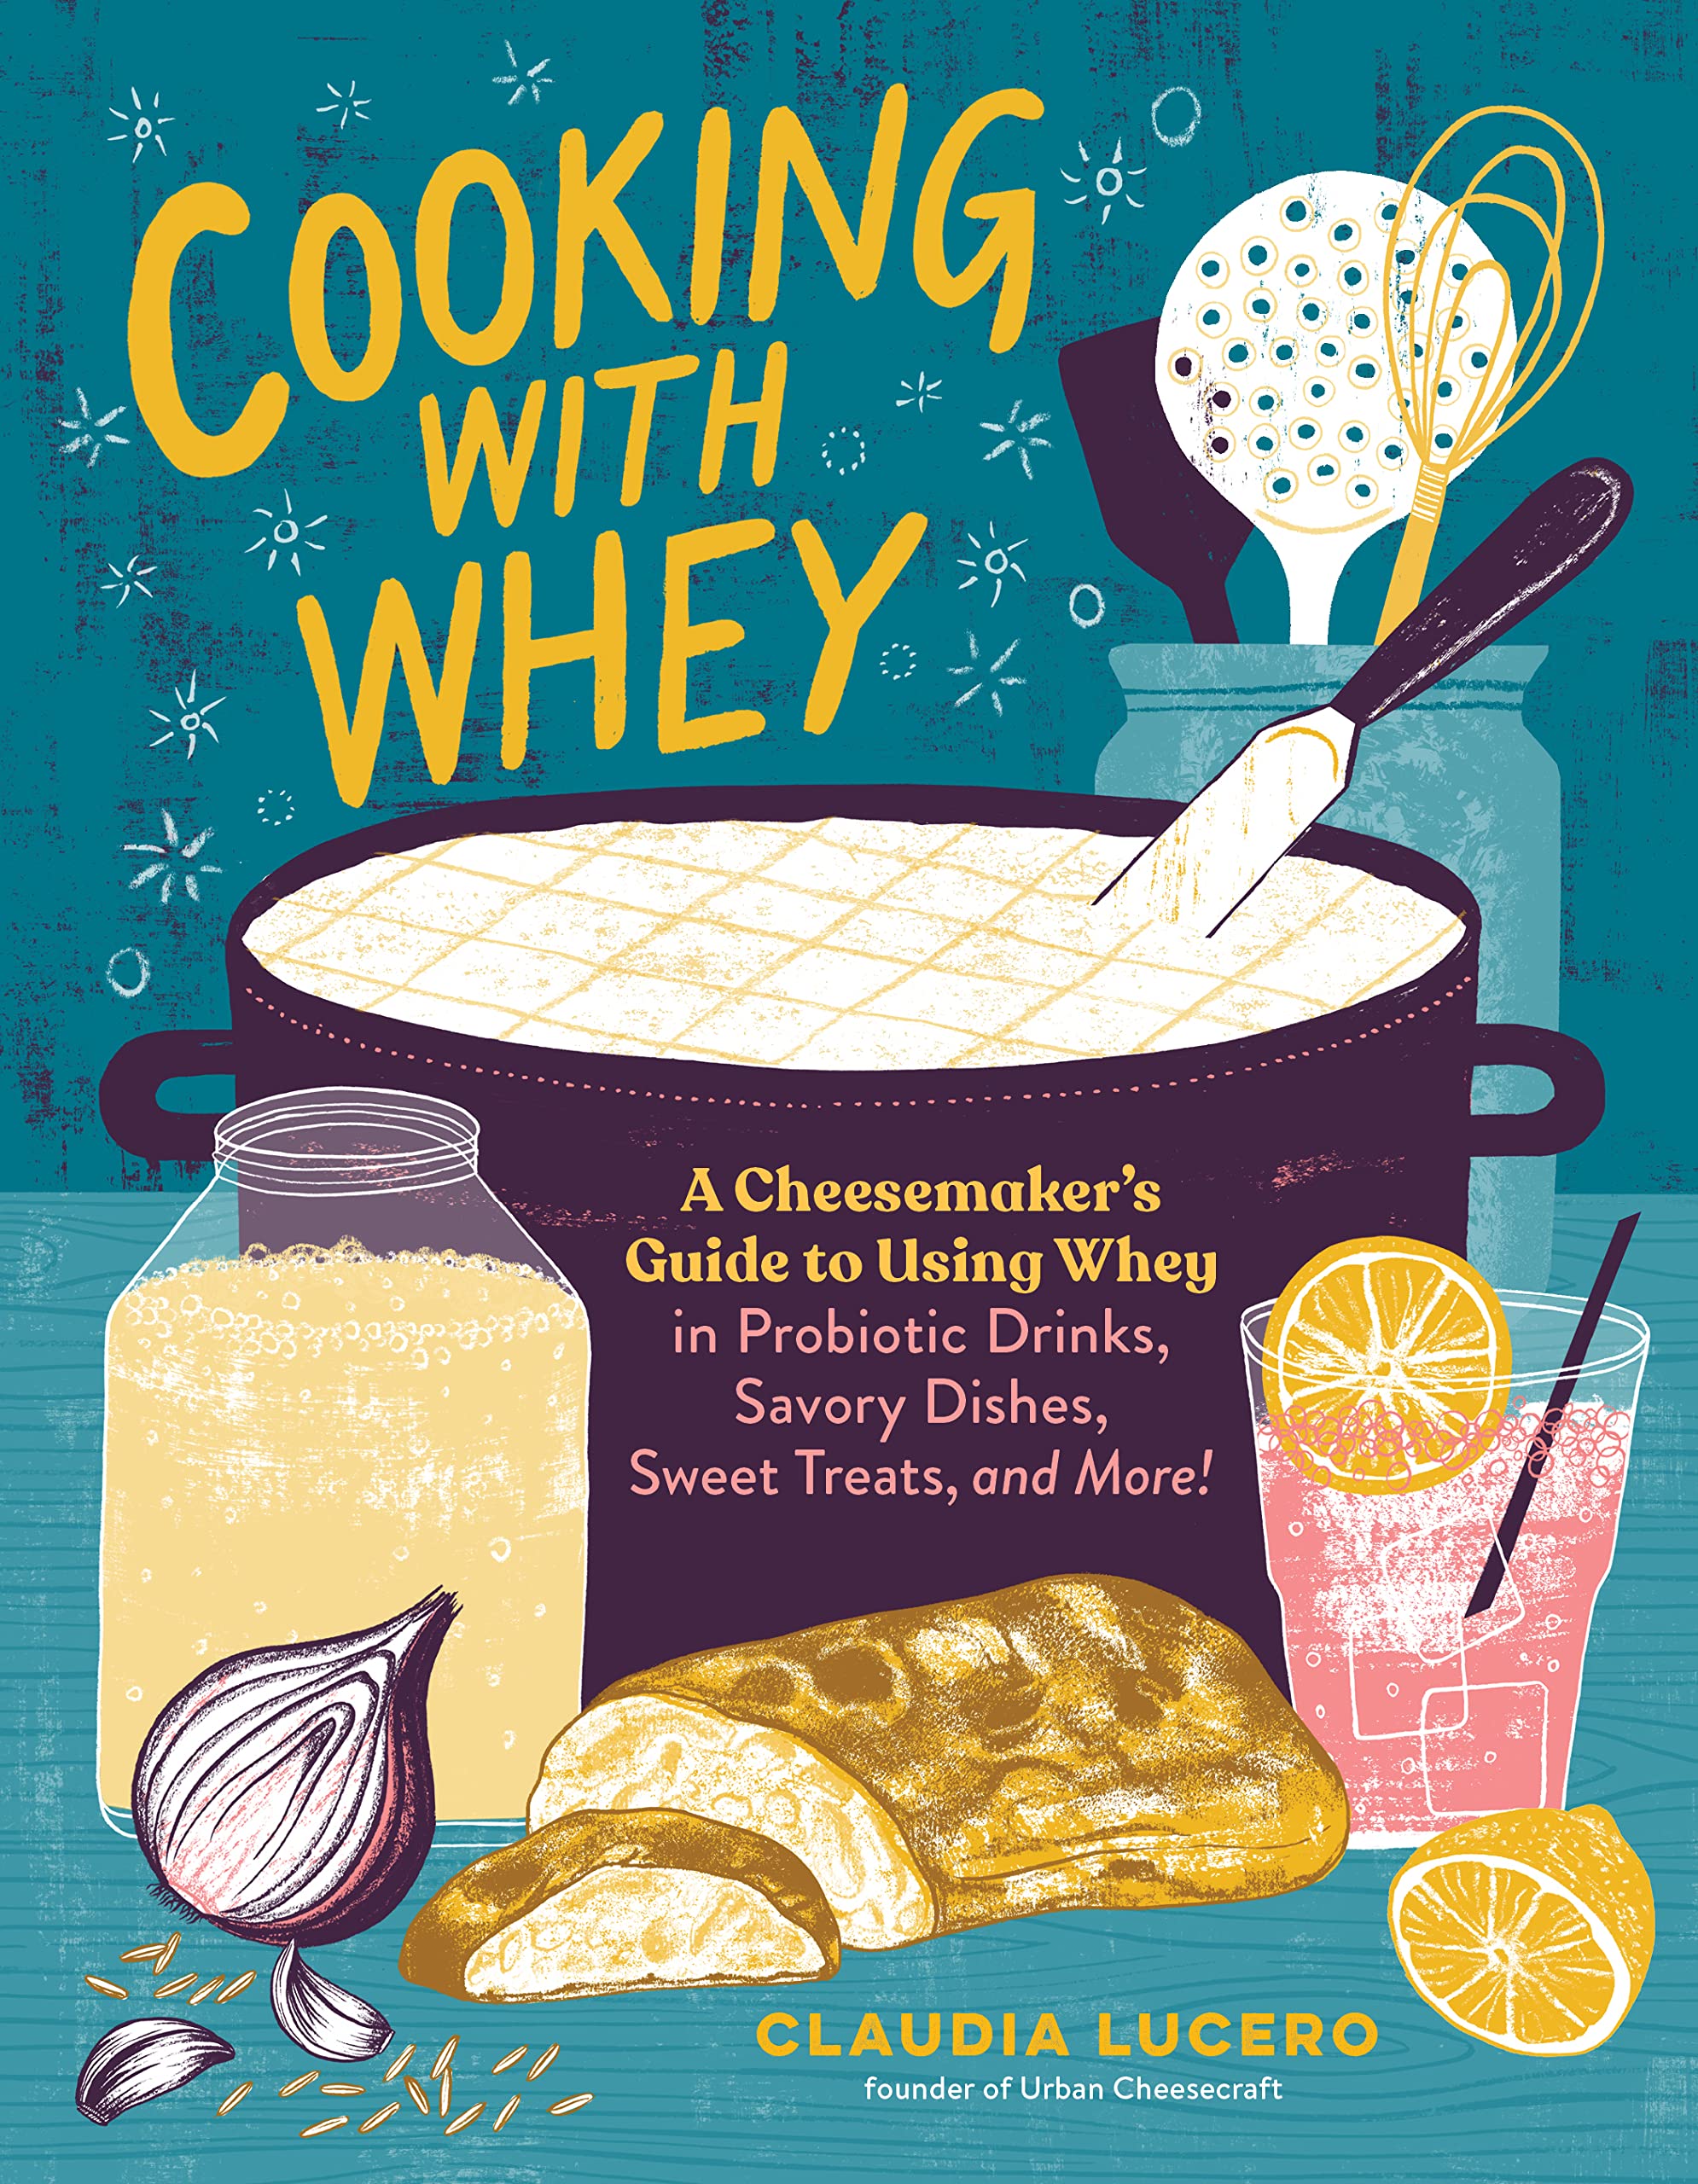 Cooking with Whey: A Cheesemaker's Guide to Using Whey in Probiotic Drinks, Savory Dishes, Sweet Treats, and More (Claudia Lucero)